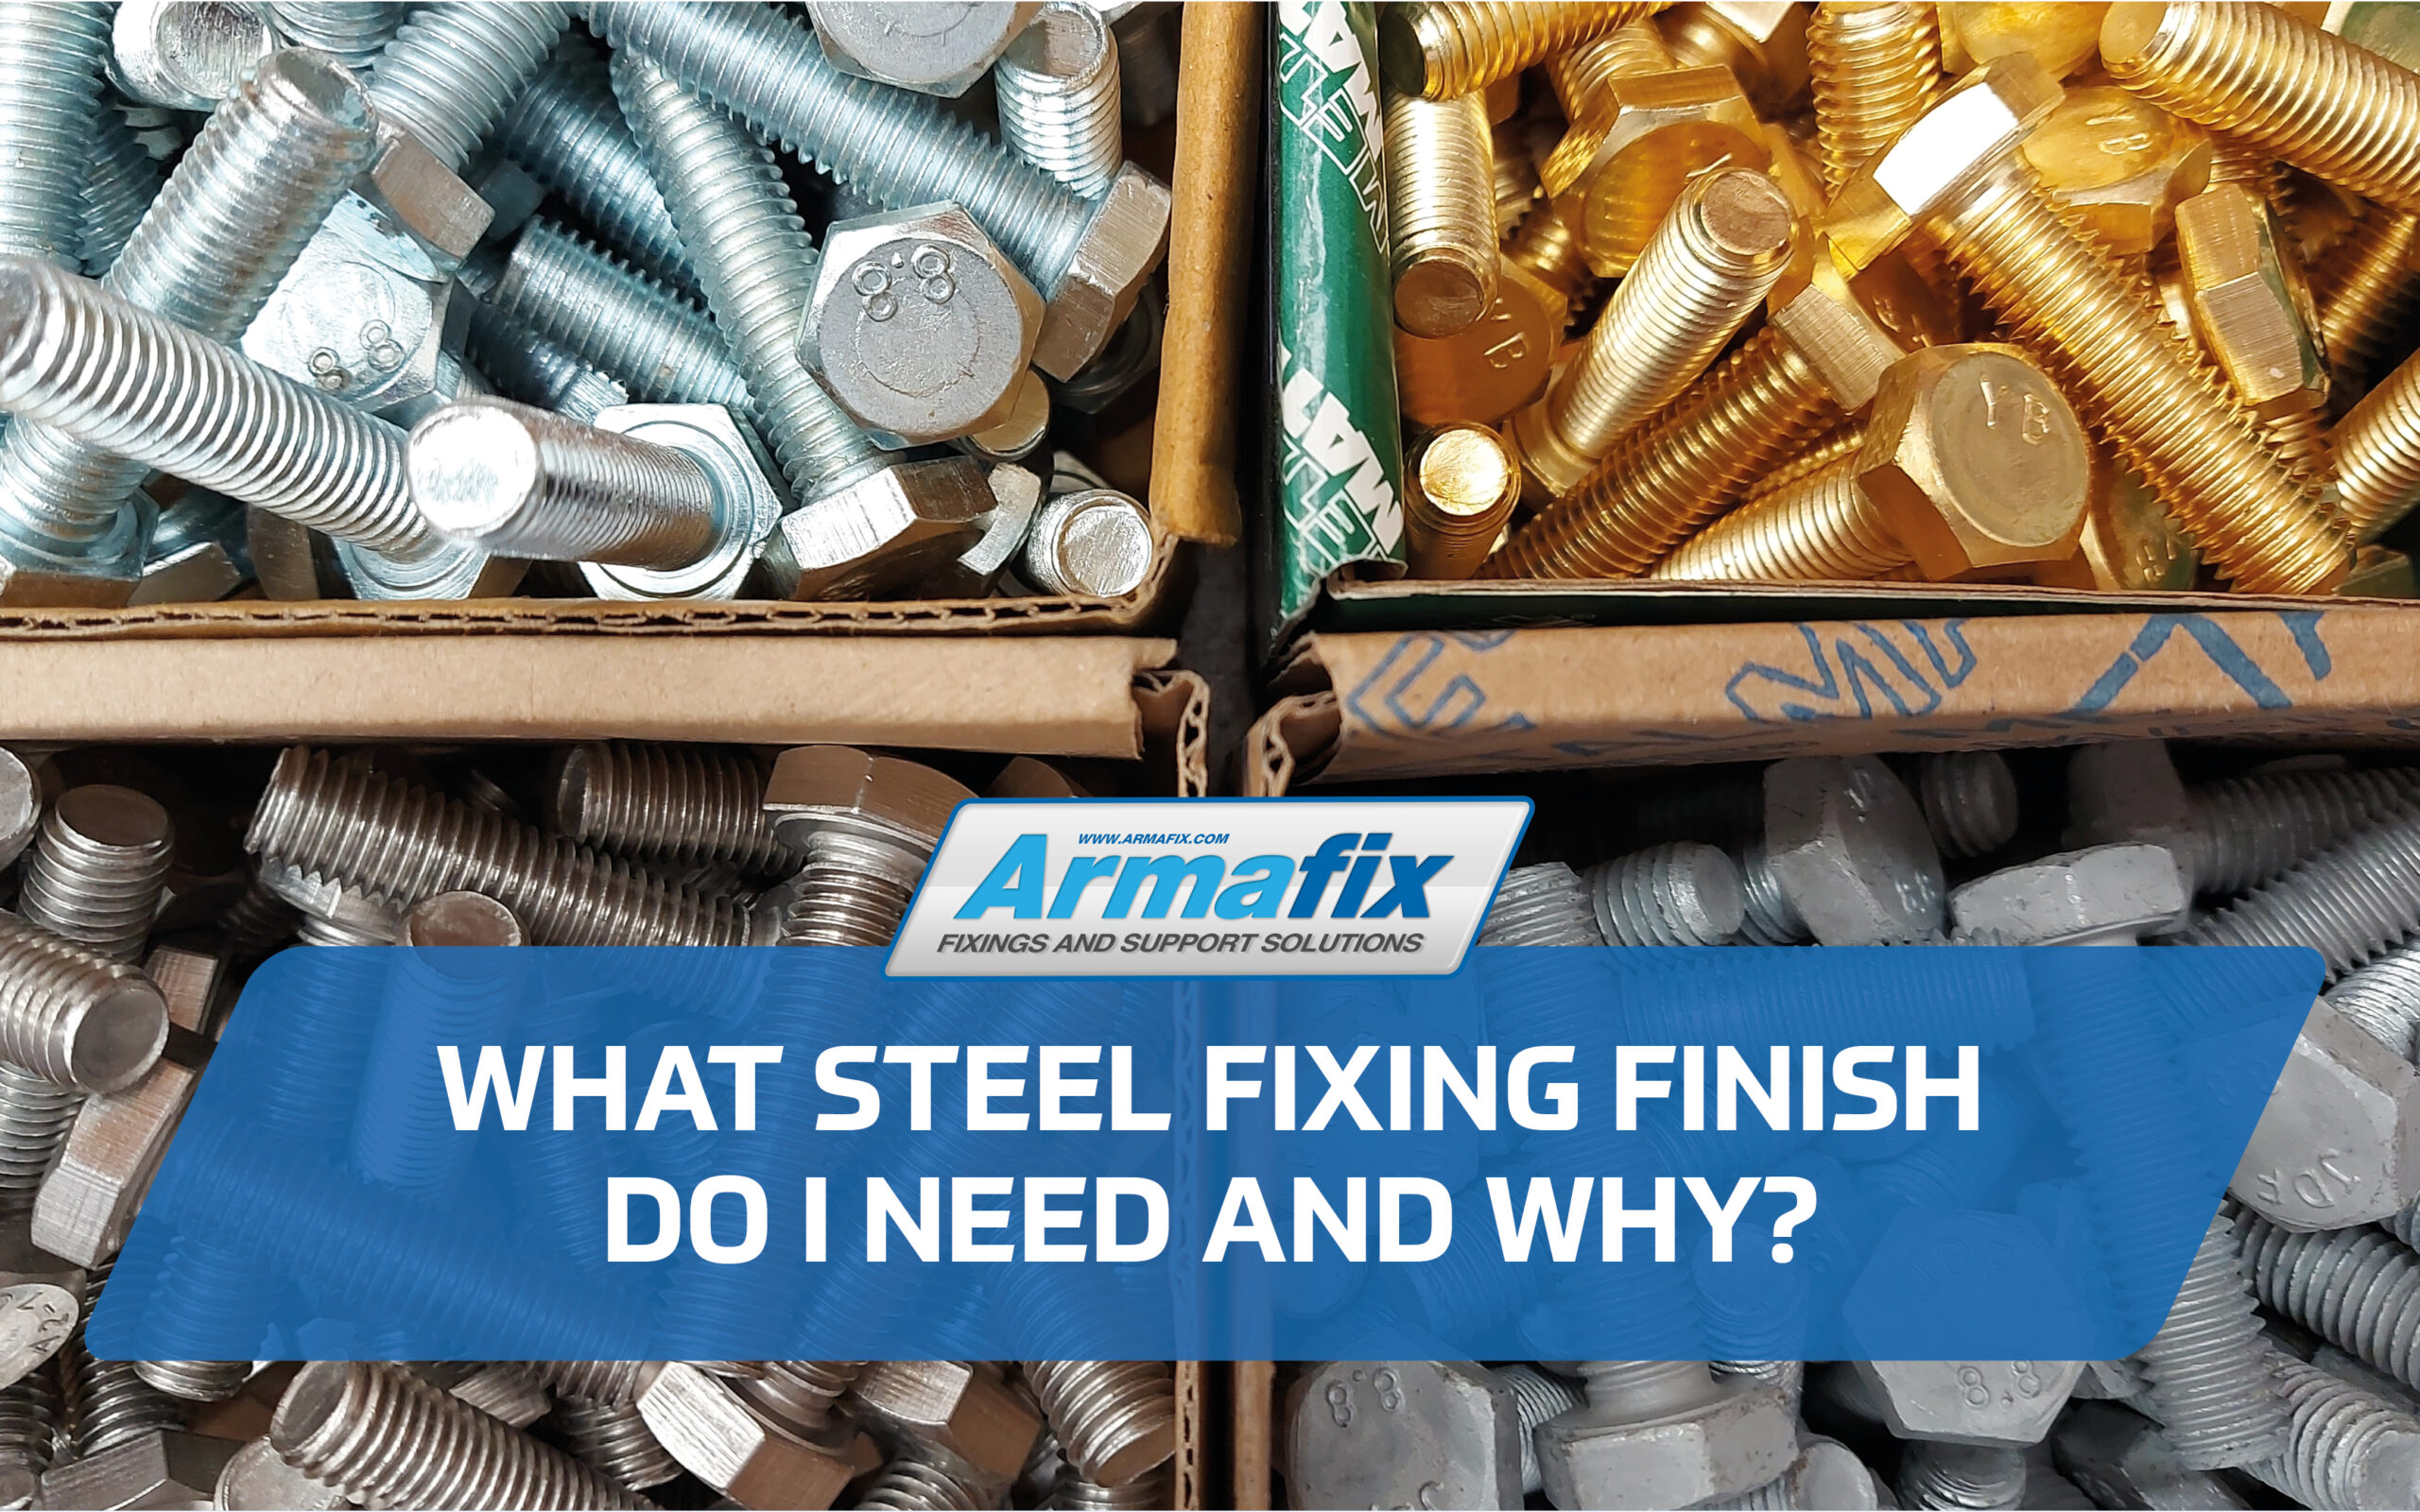 What Steel Fixing Finish Do I Need and Why?